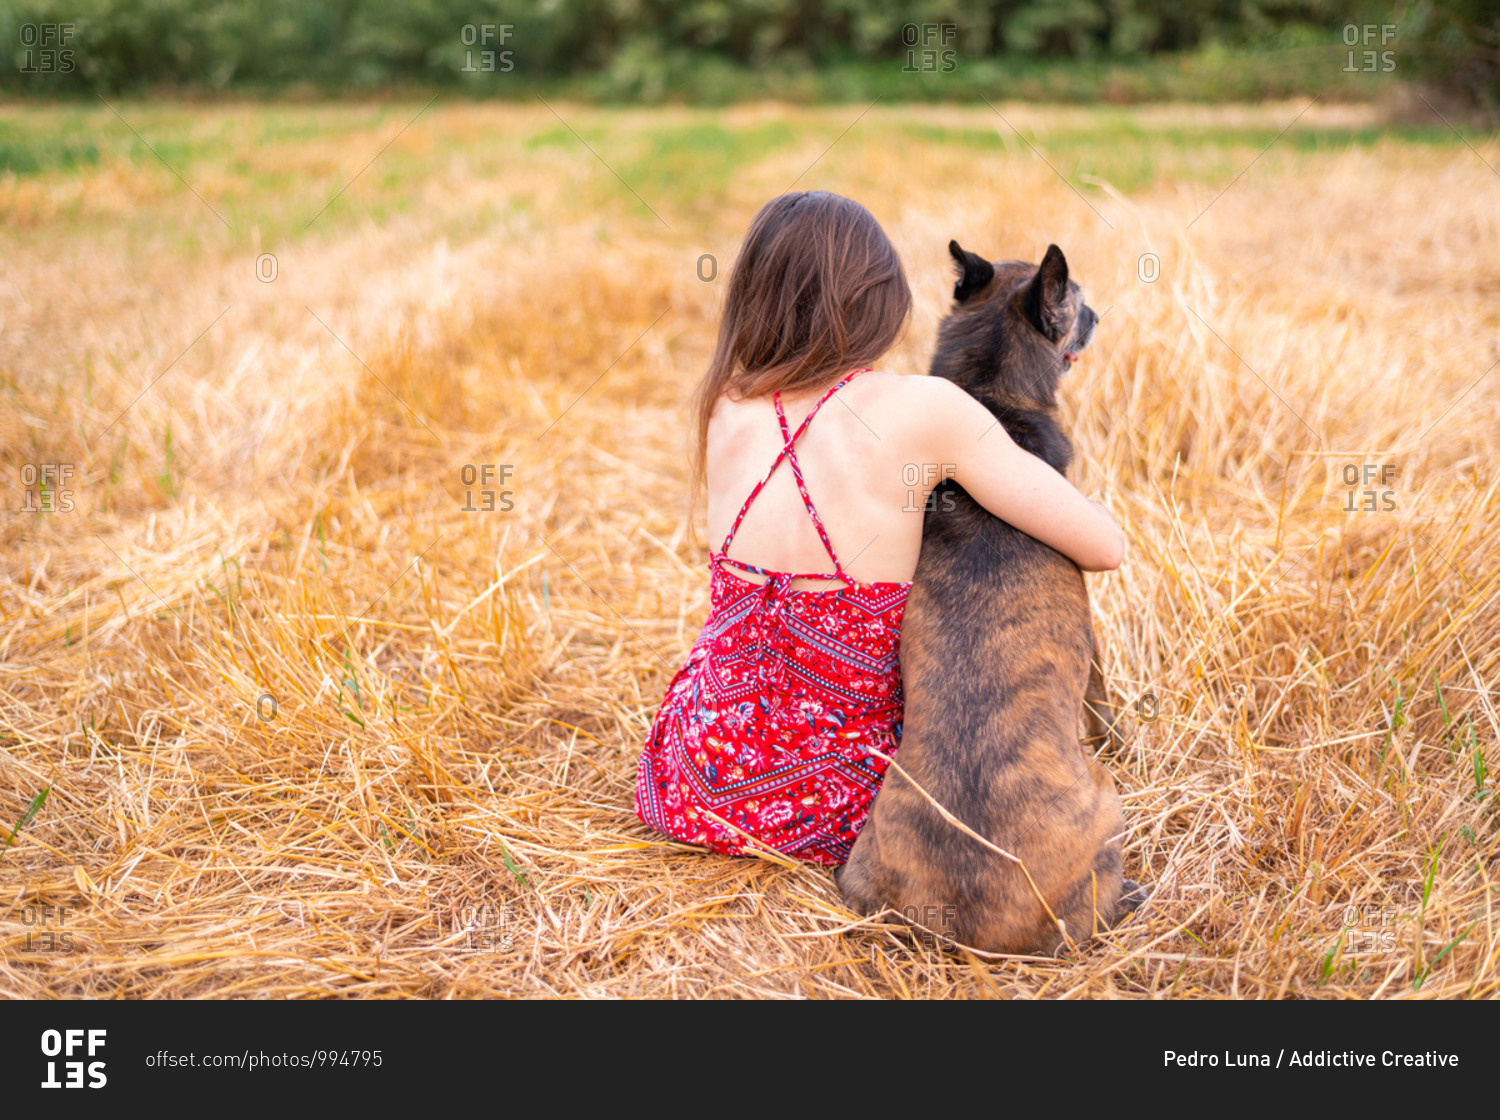 Female and dog with big ears looking at each other while resting under colorful sky at sundown